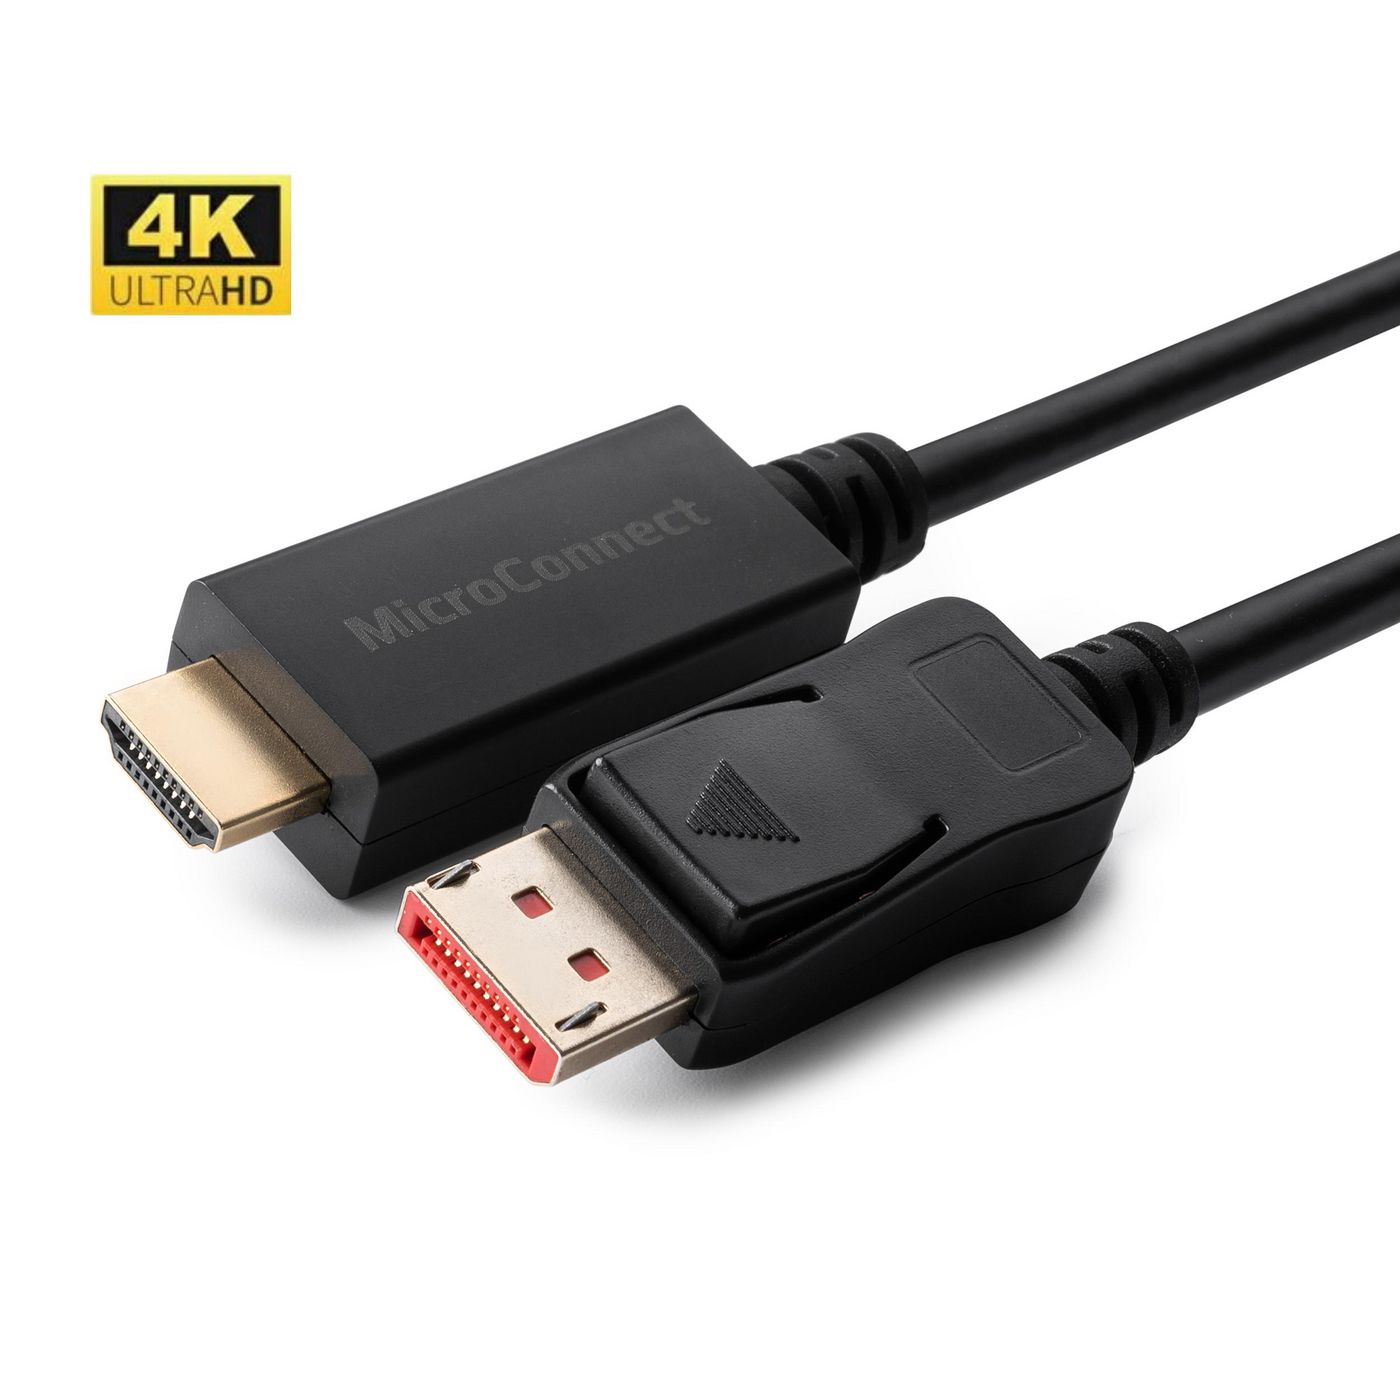 DisplayPort To Hdmi Cable 4k Supports 4k/ 2k 60hz - 5m